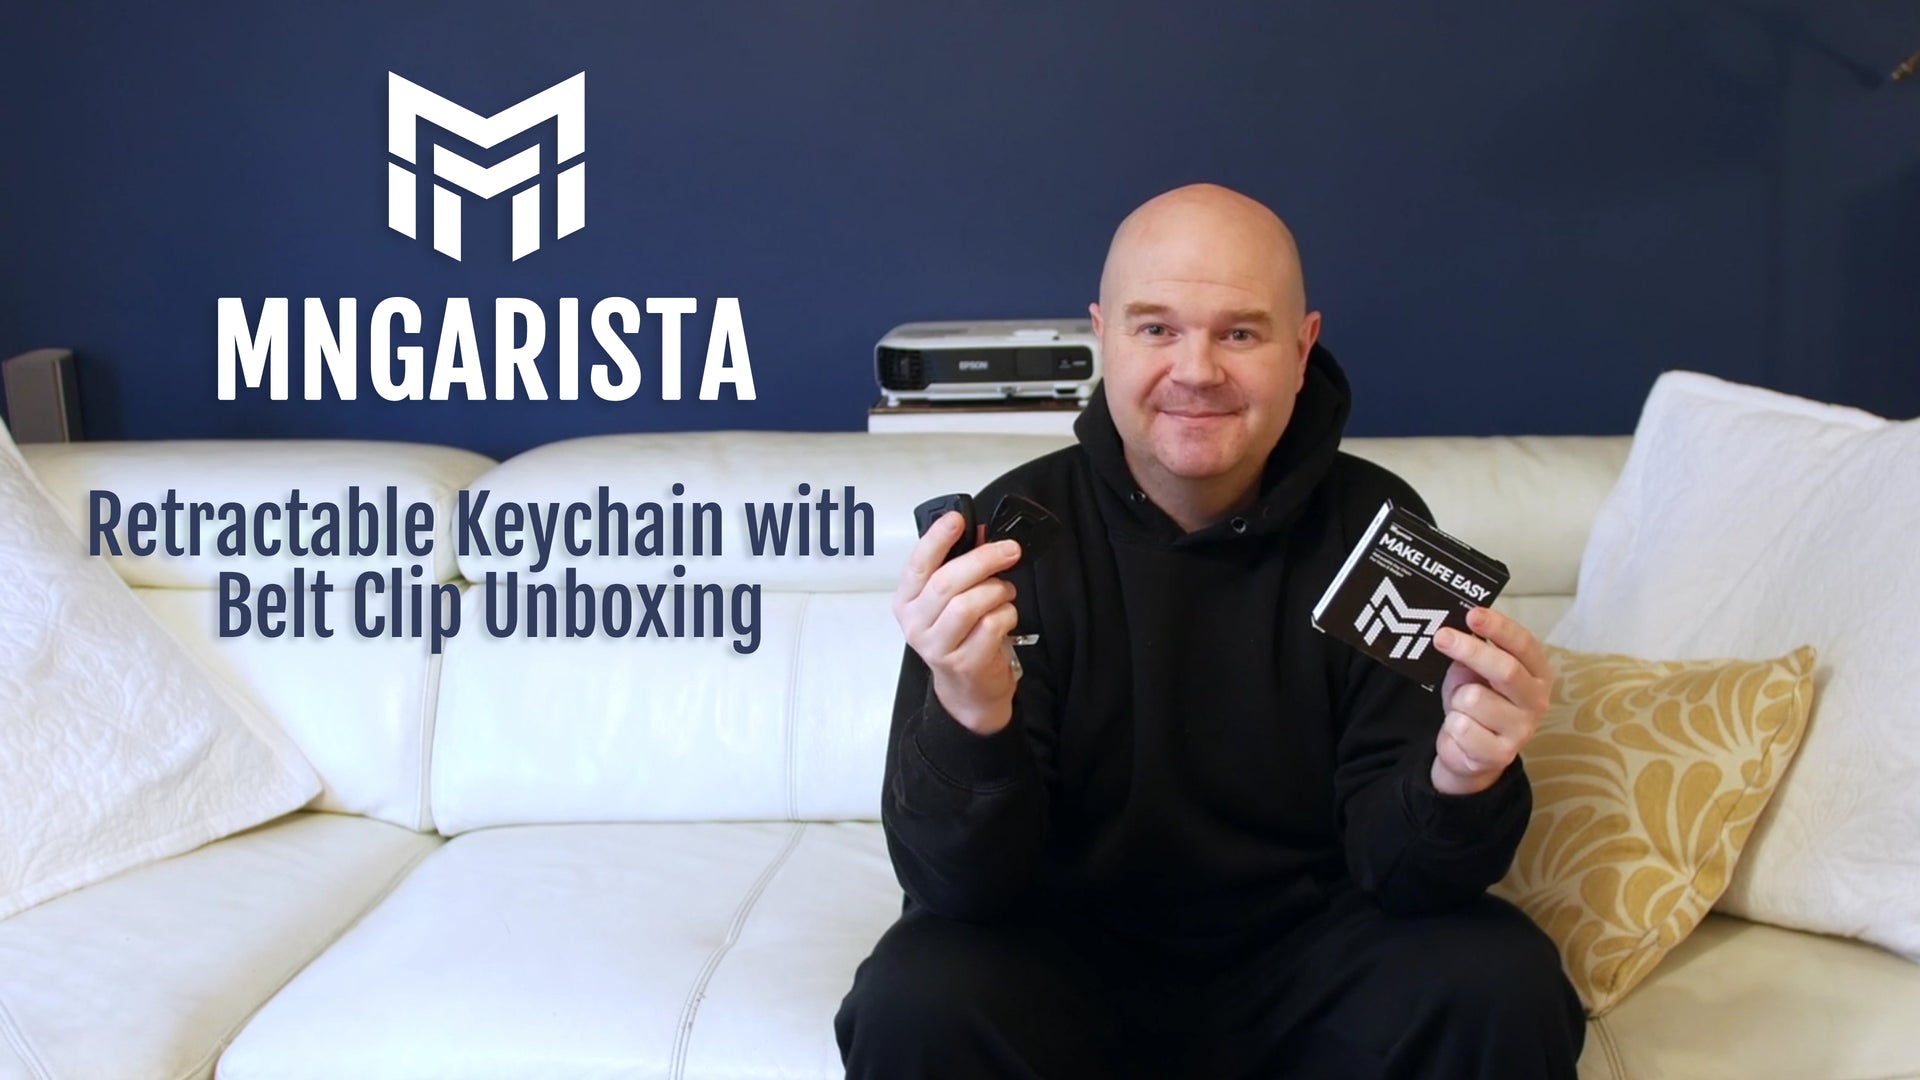 Load video: How the Mngarista metal retractable keychains work